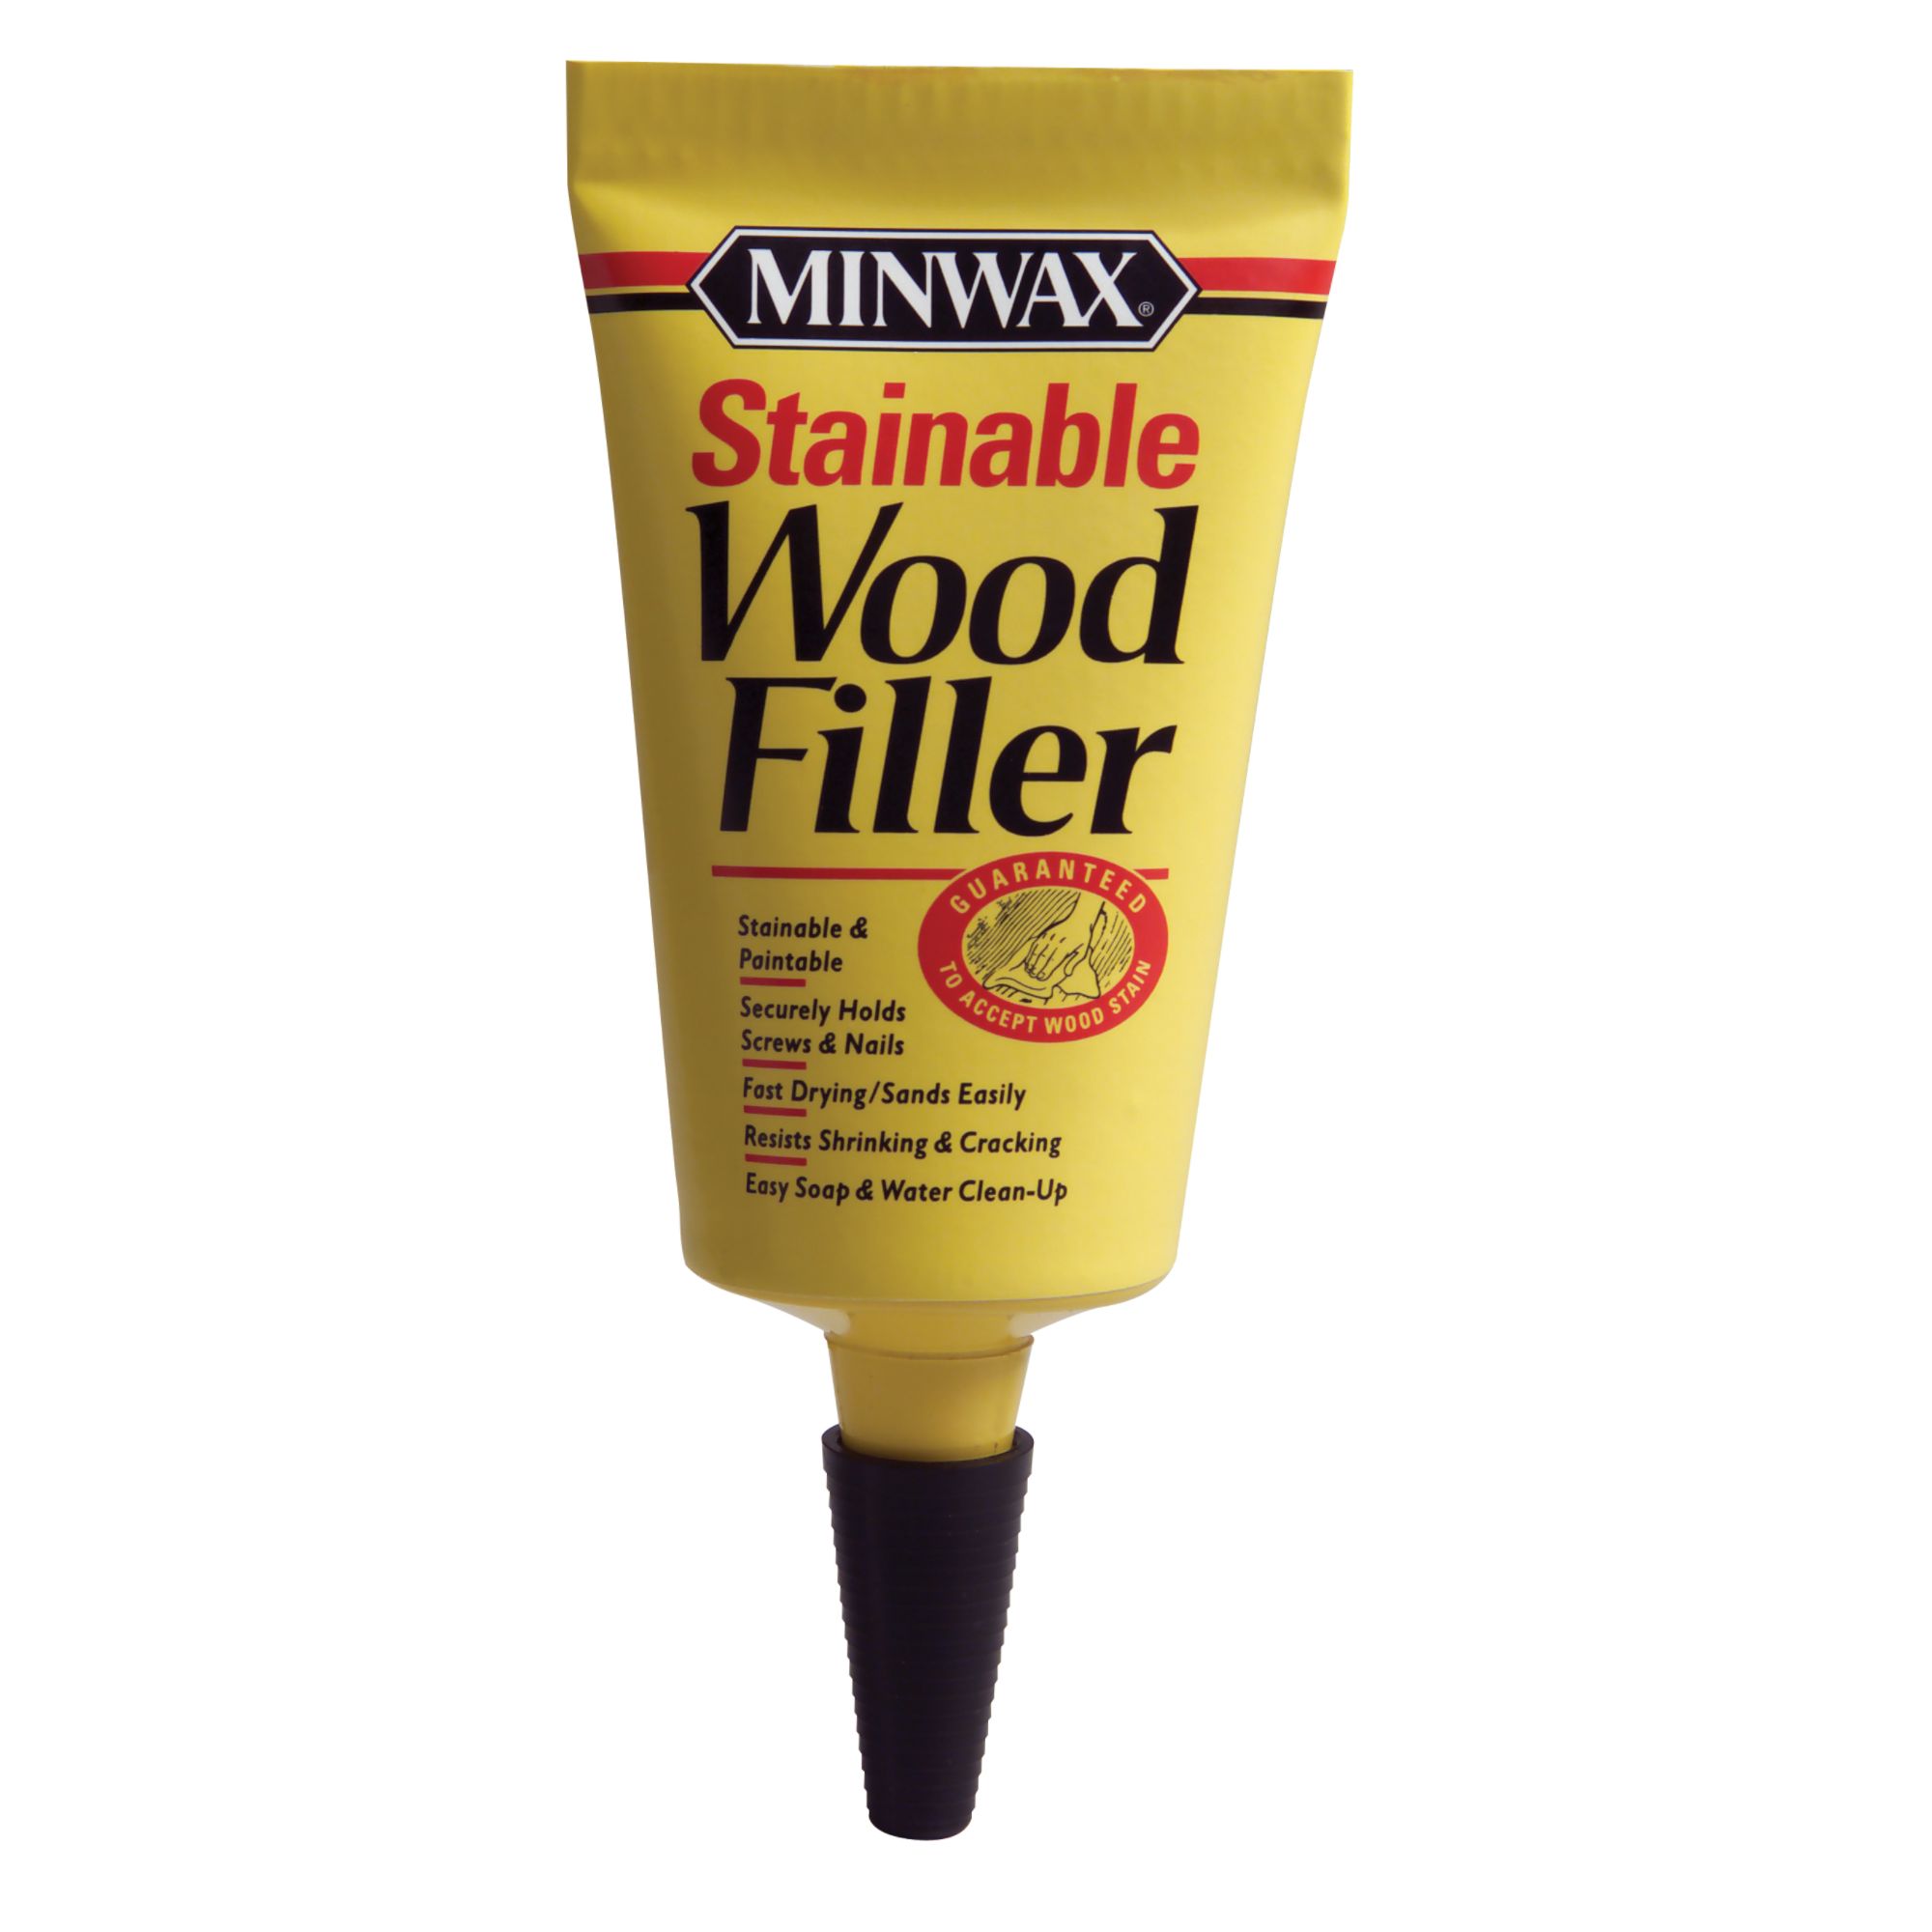 Minwax Stainable Wood Filler, 1 oz.